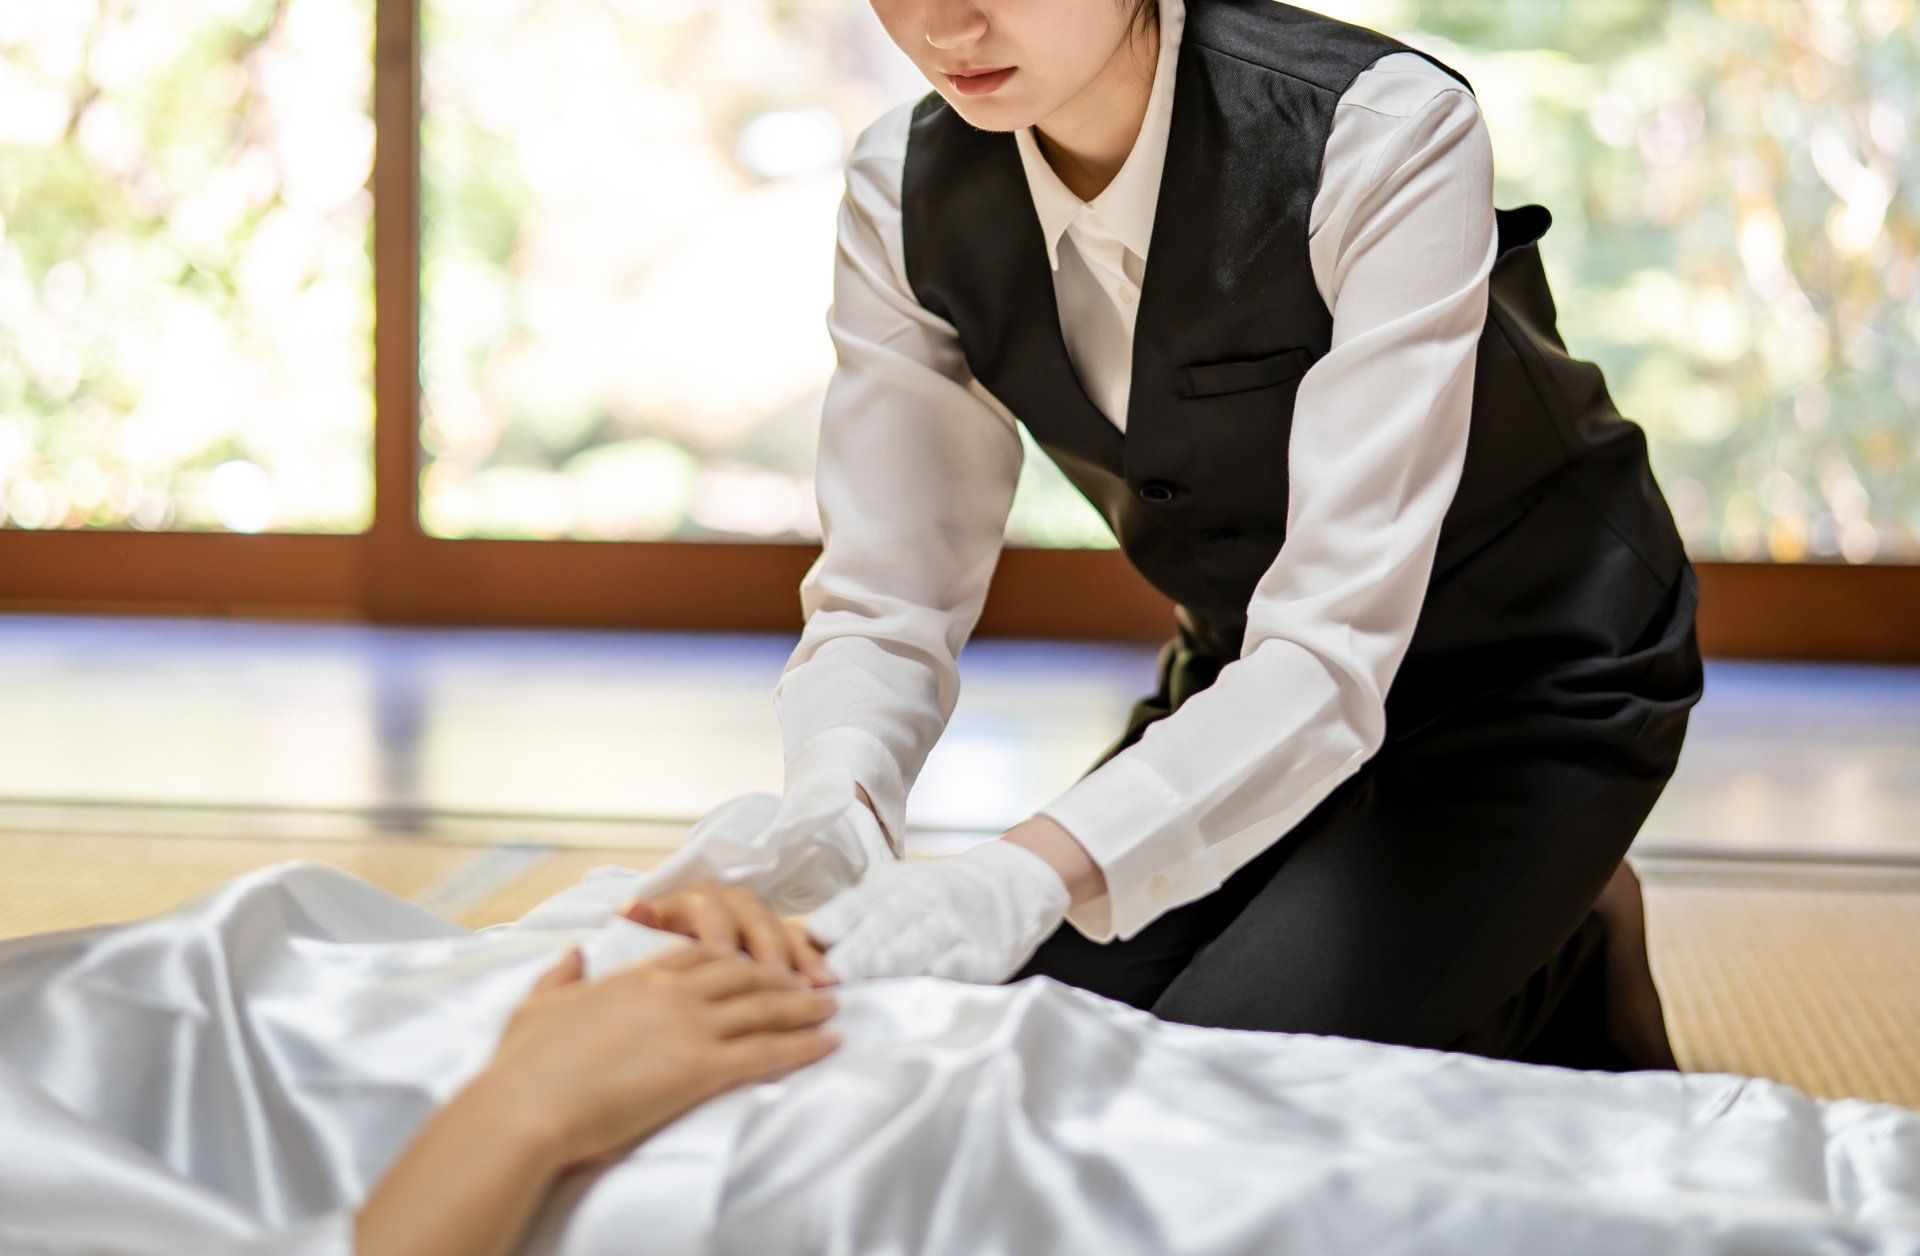 What is Embalming?